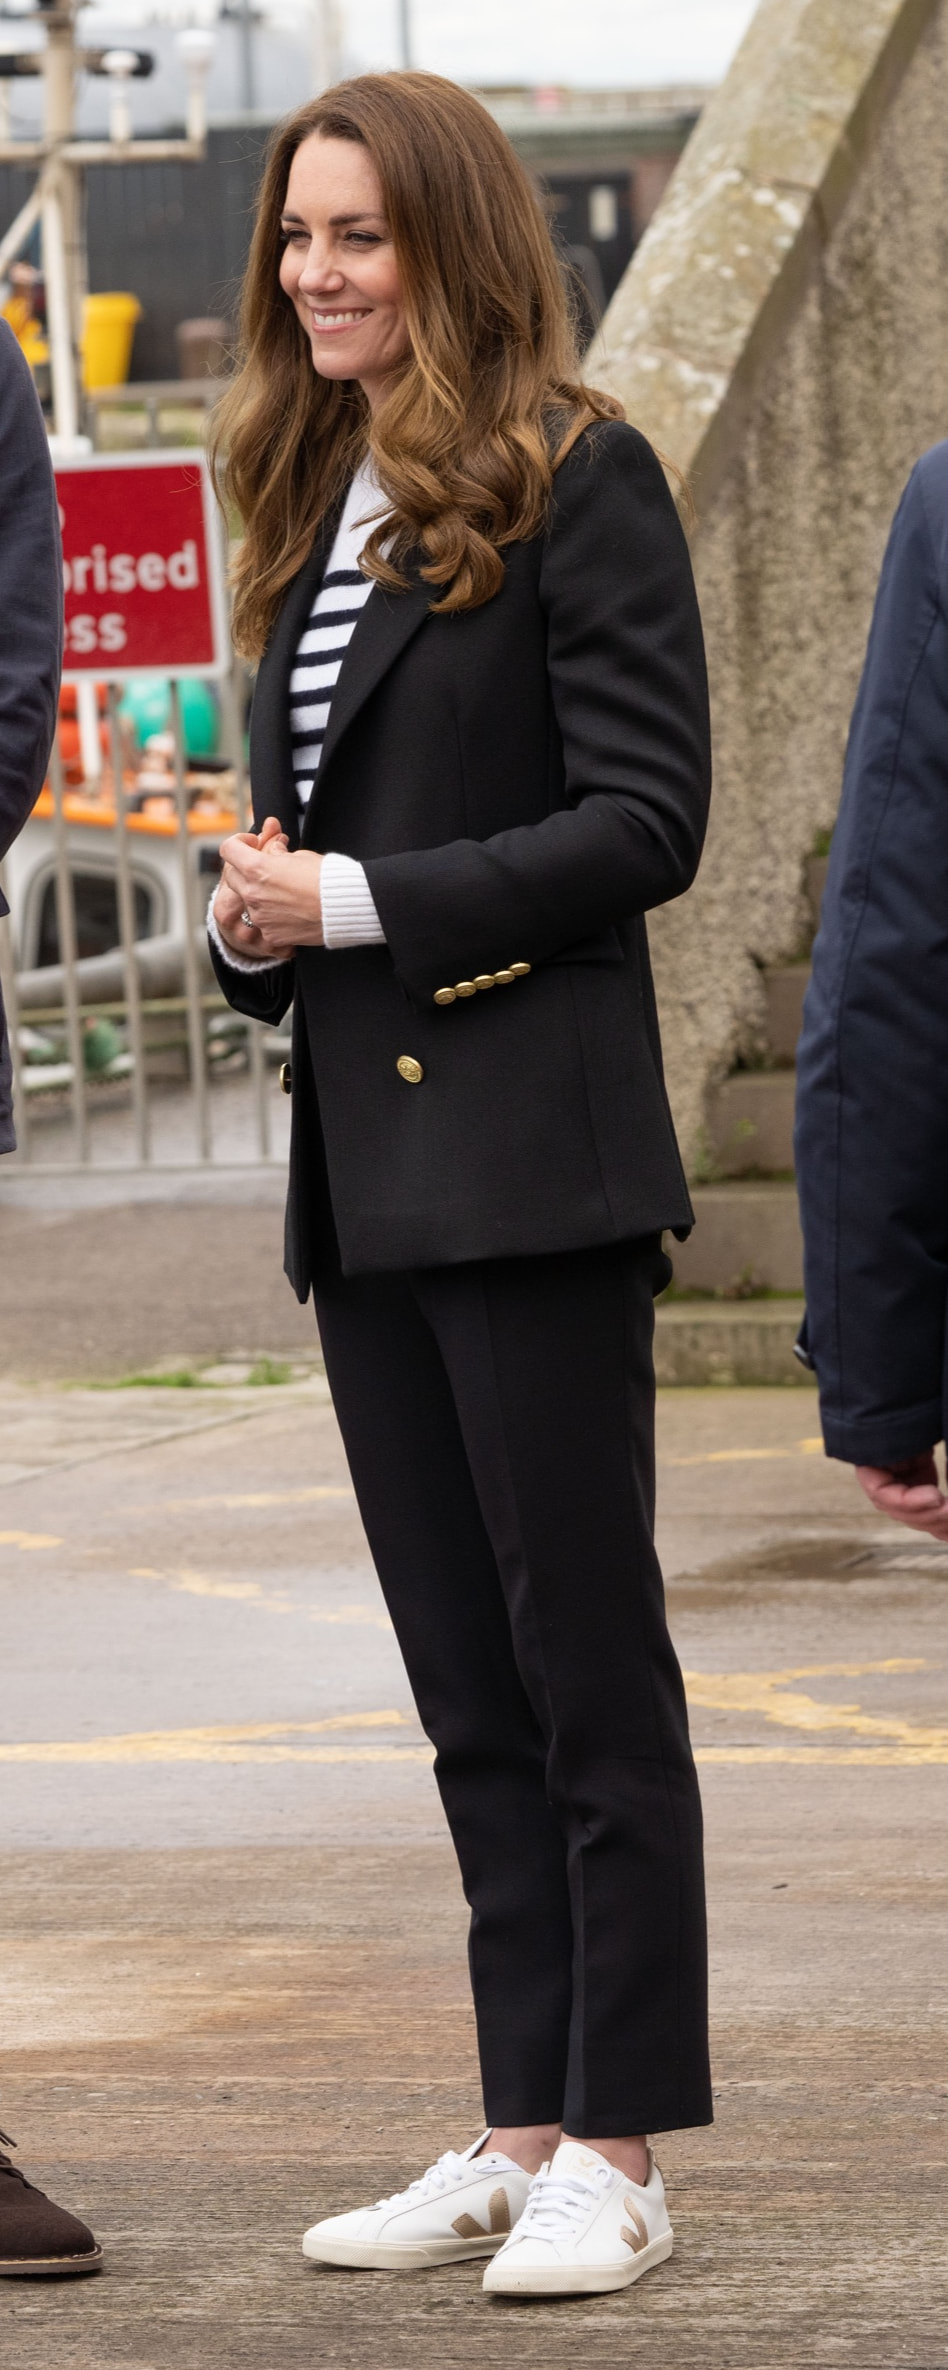 Duchess of Cambridge Royal Visit Scotland - Day 3,  St Andrews on 26 May 2021